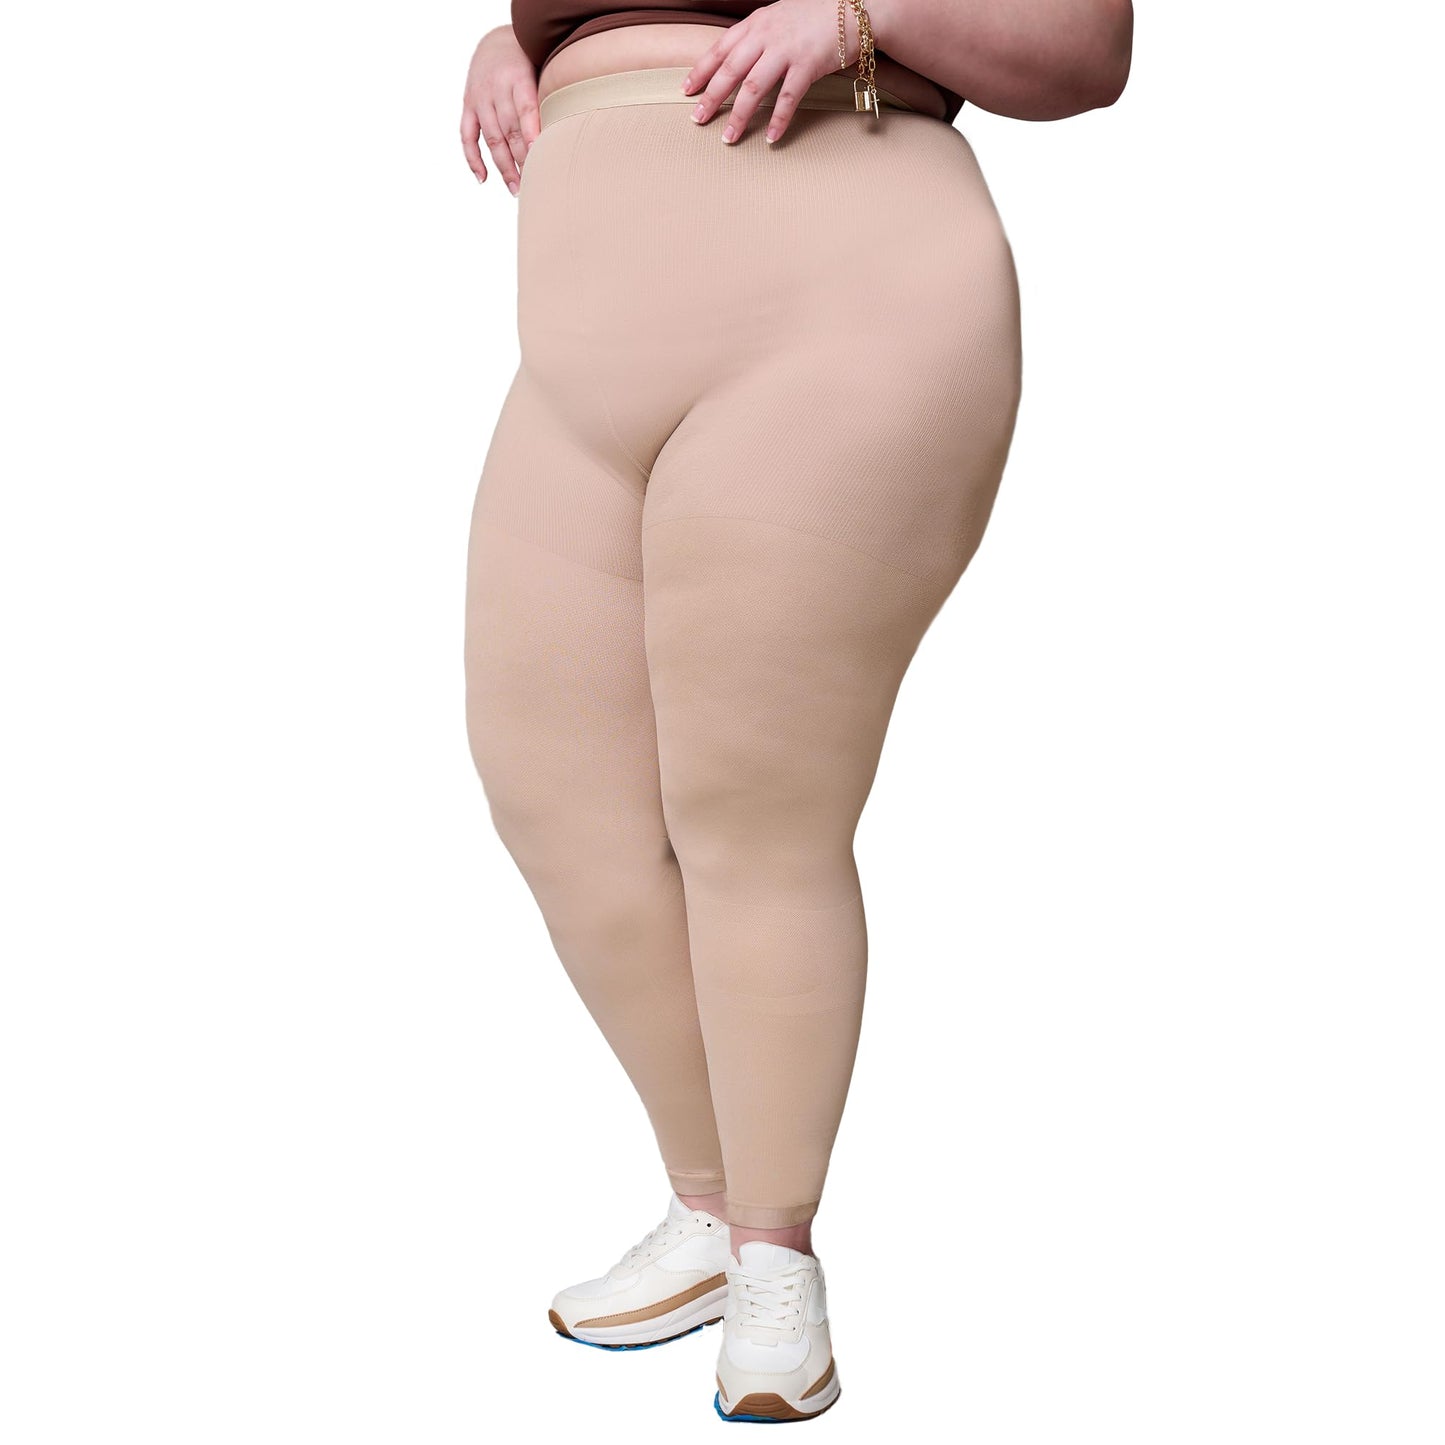 Plus Size Medical Footless Compression Tights(20-30mmHg)